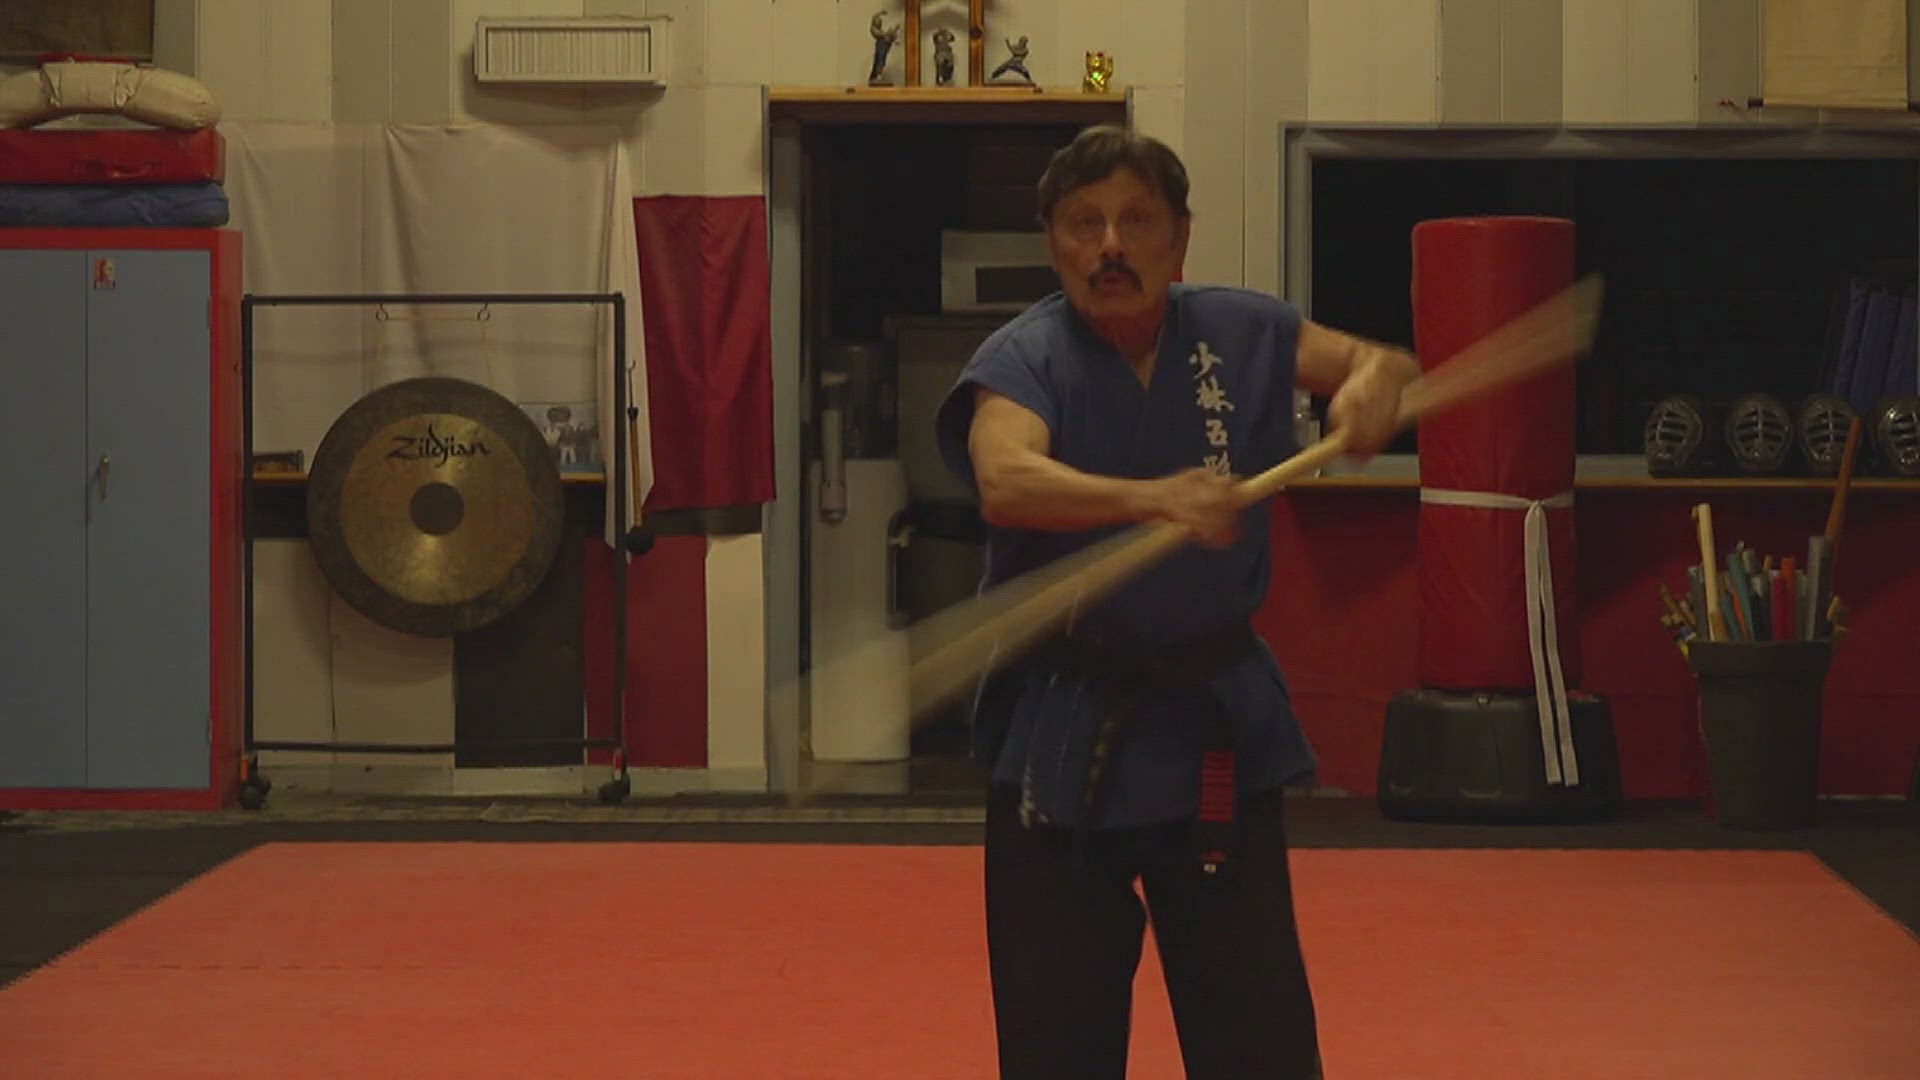 Moline martial arts instructor John Morrow was recently diagnosed with lung cancer, but the disease isn't keeping him from passing on his knowledge.